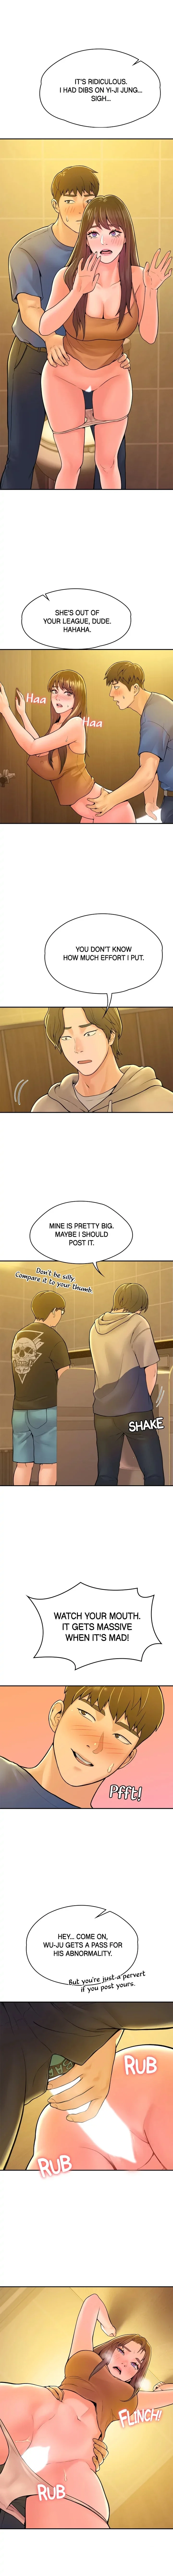 campus-today-chap-39-5